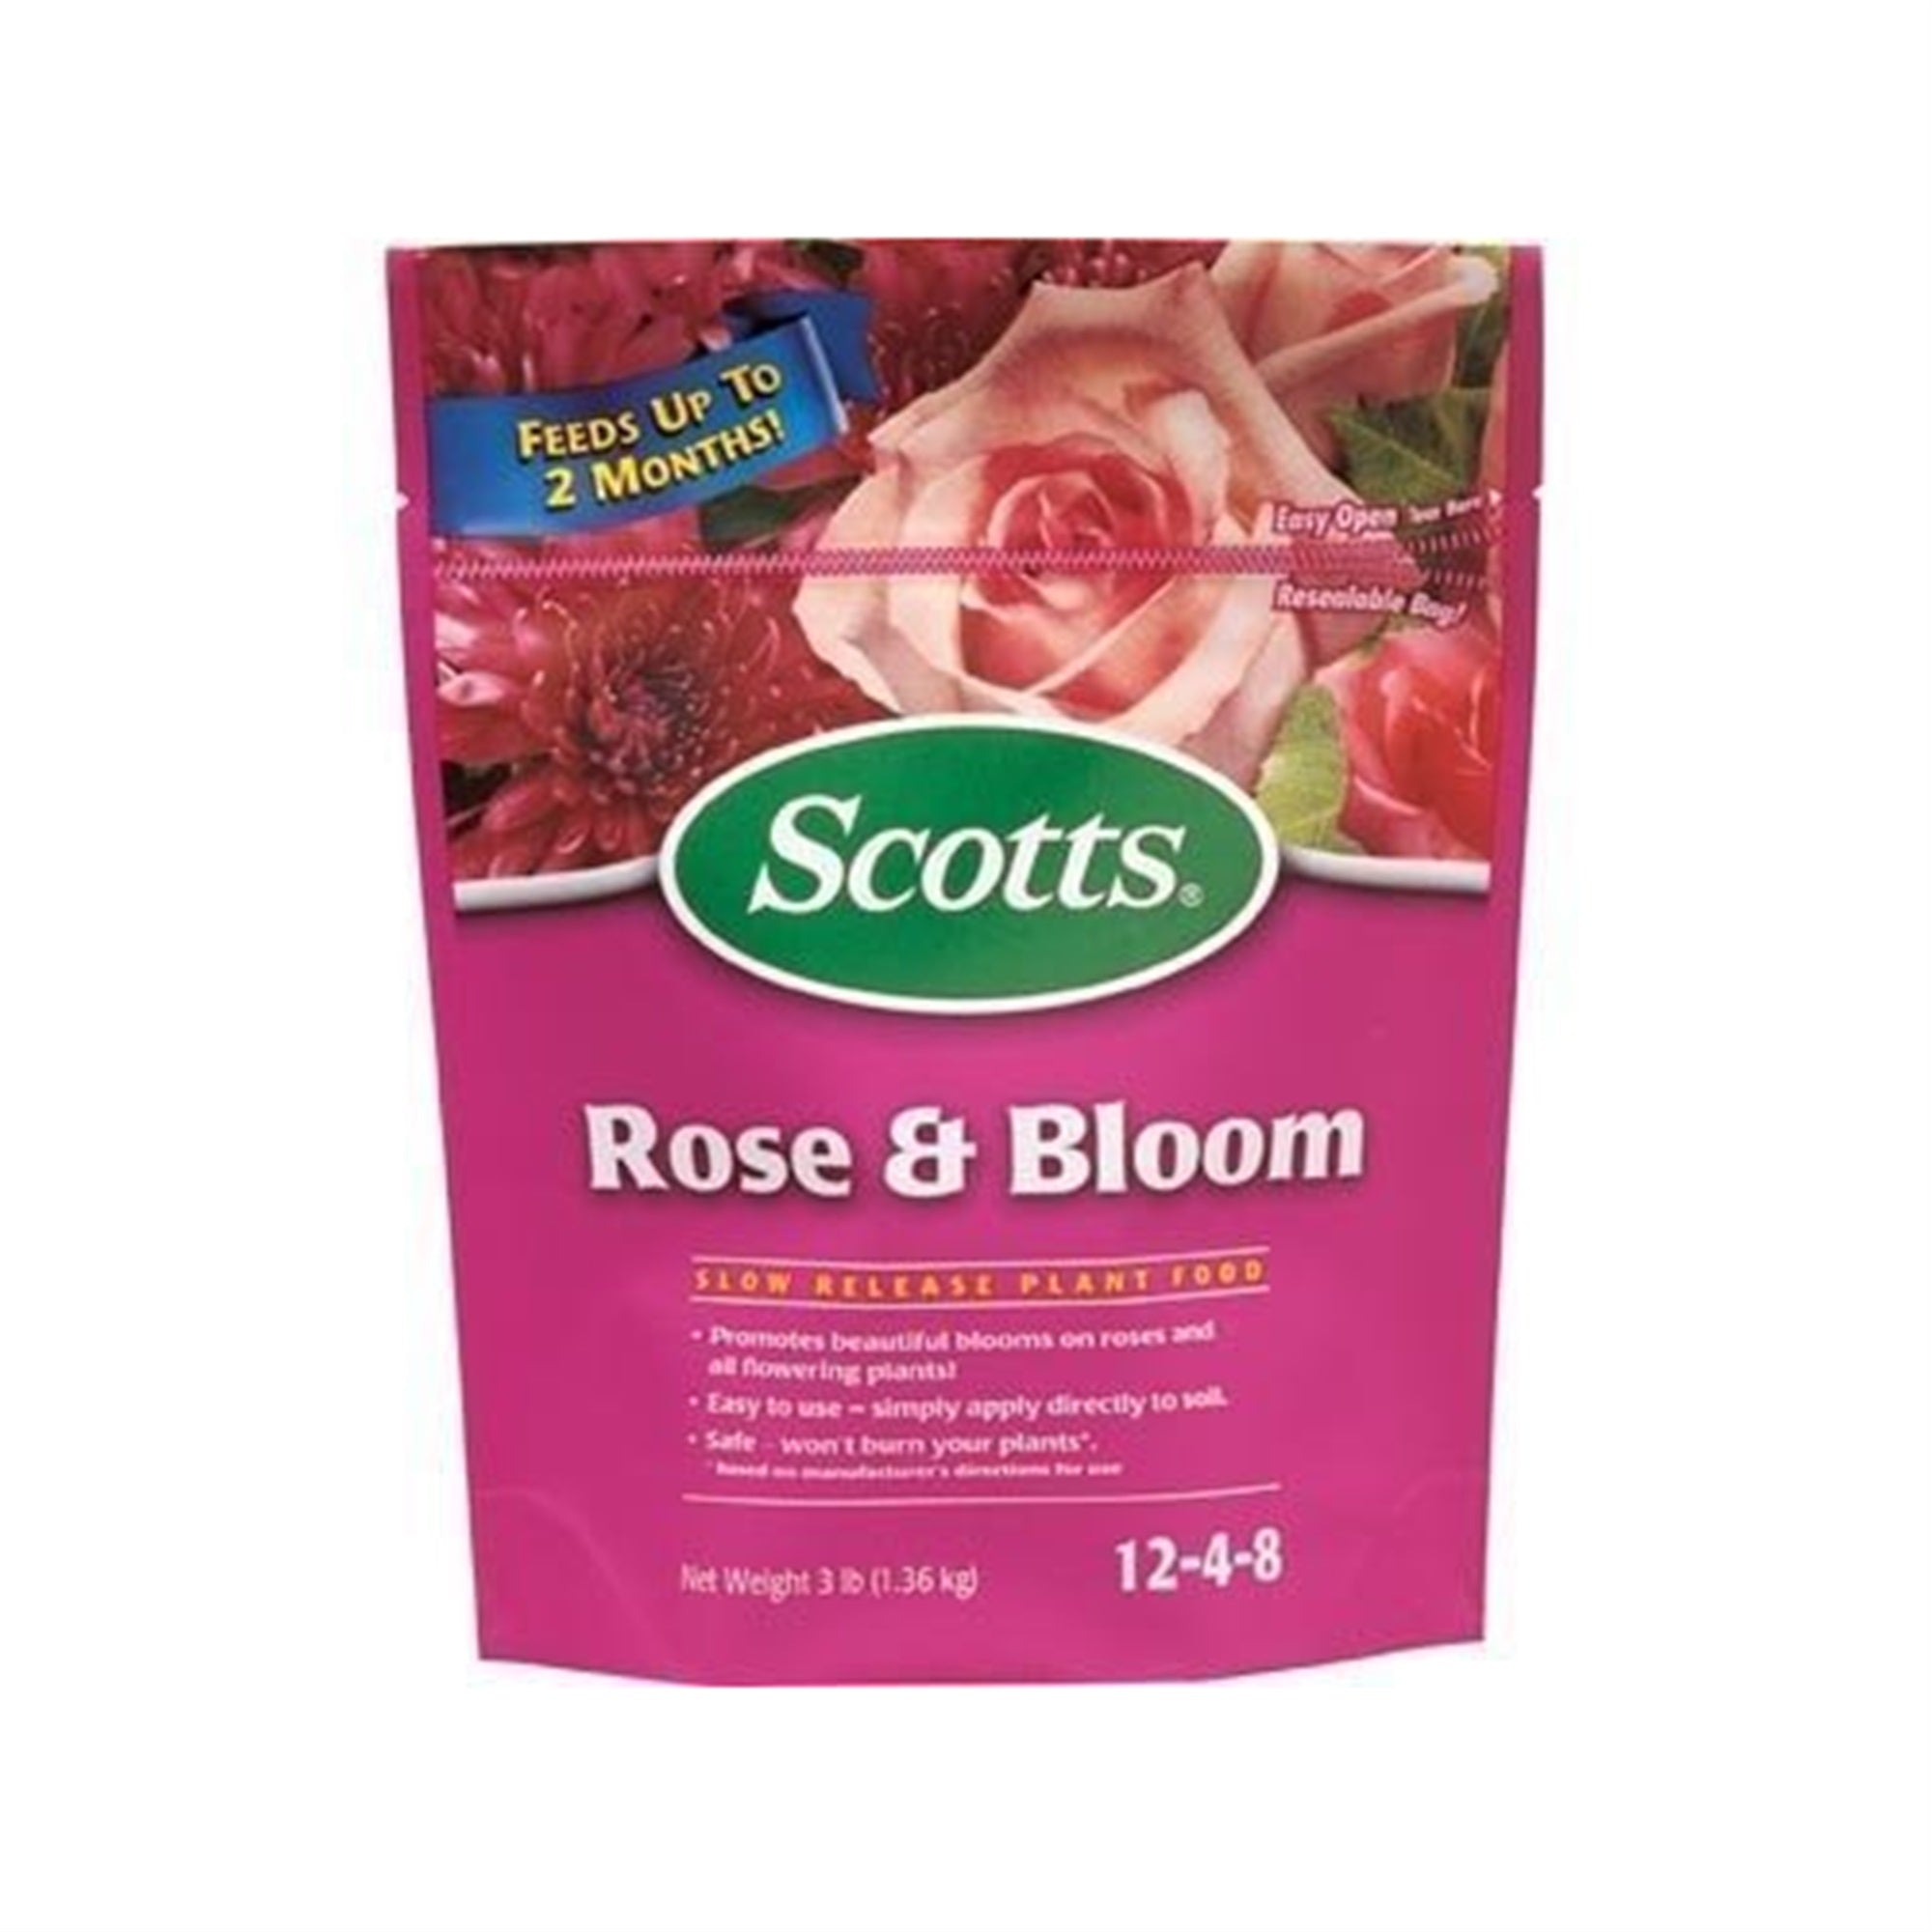 Scotts Rose & Bloom Continuous Release Plant Food- 3# bag